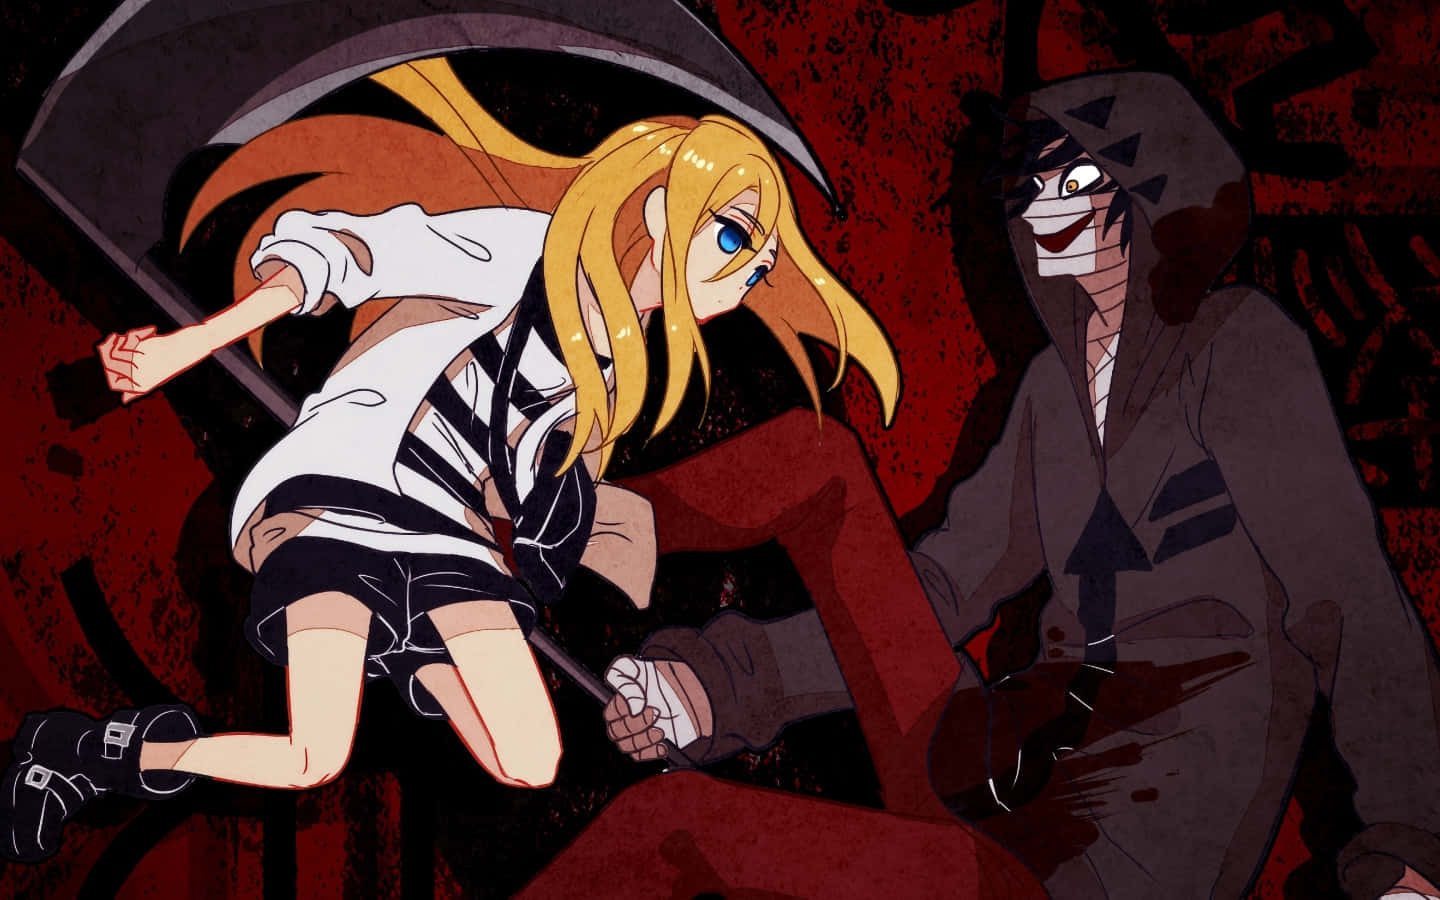 Download A mysterious, captivating scene from the supernatural thriller anime  Angels Of Death.